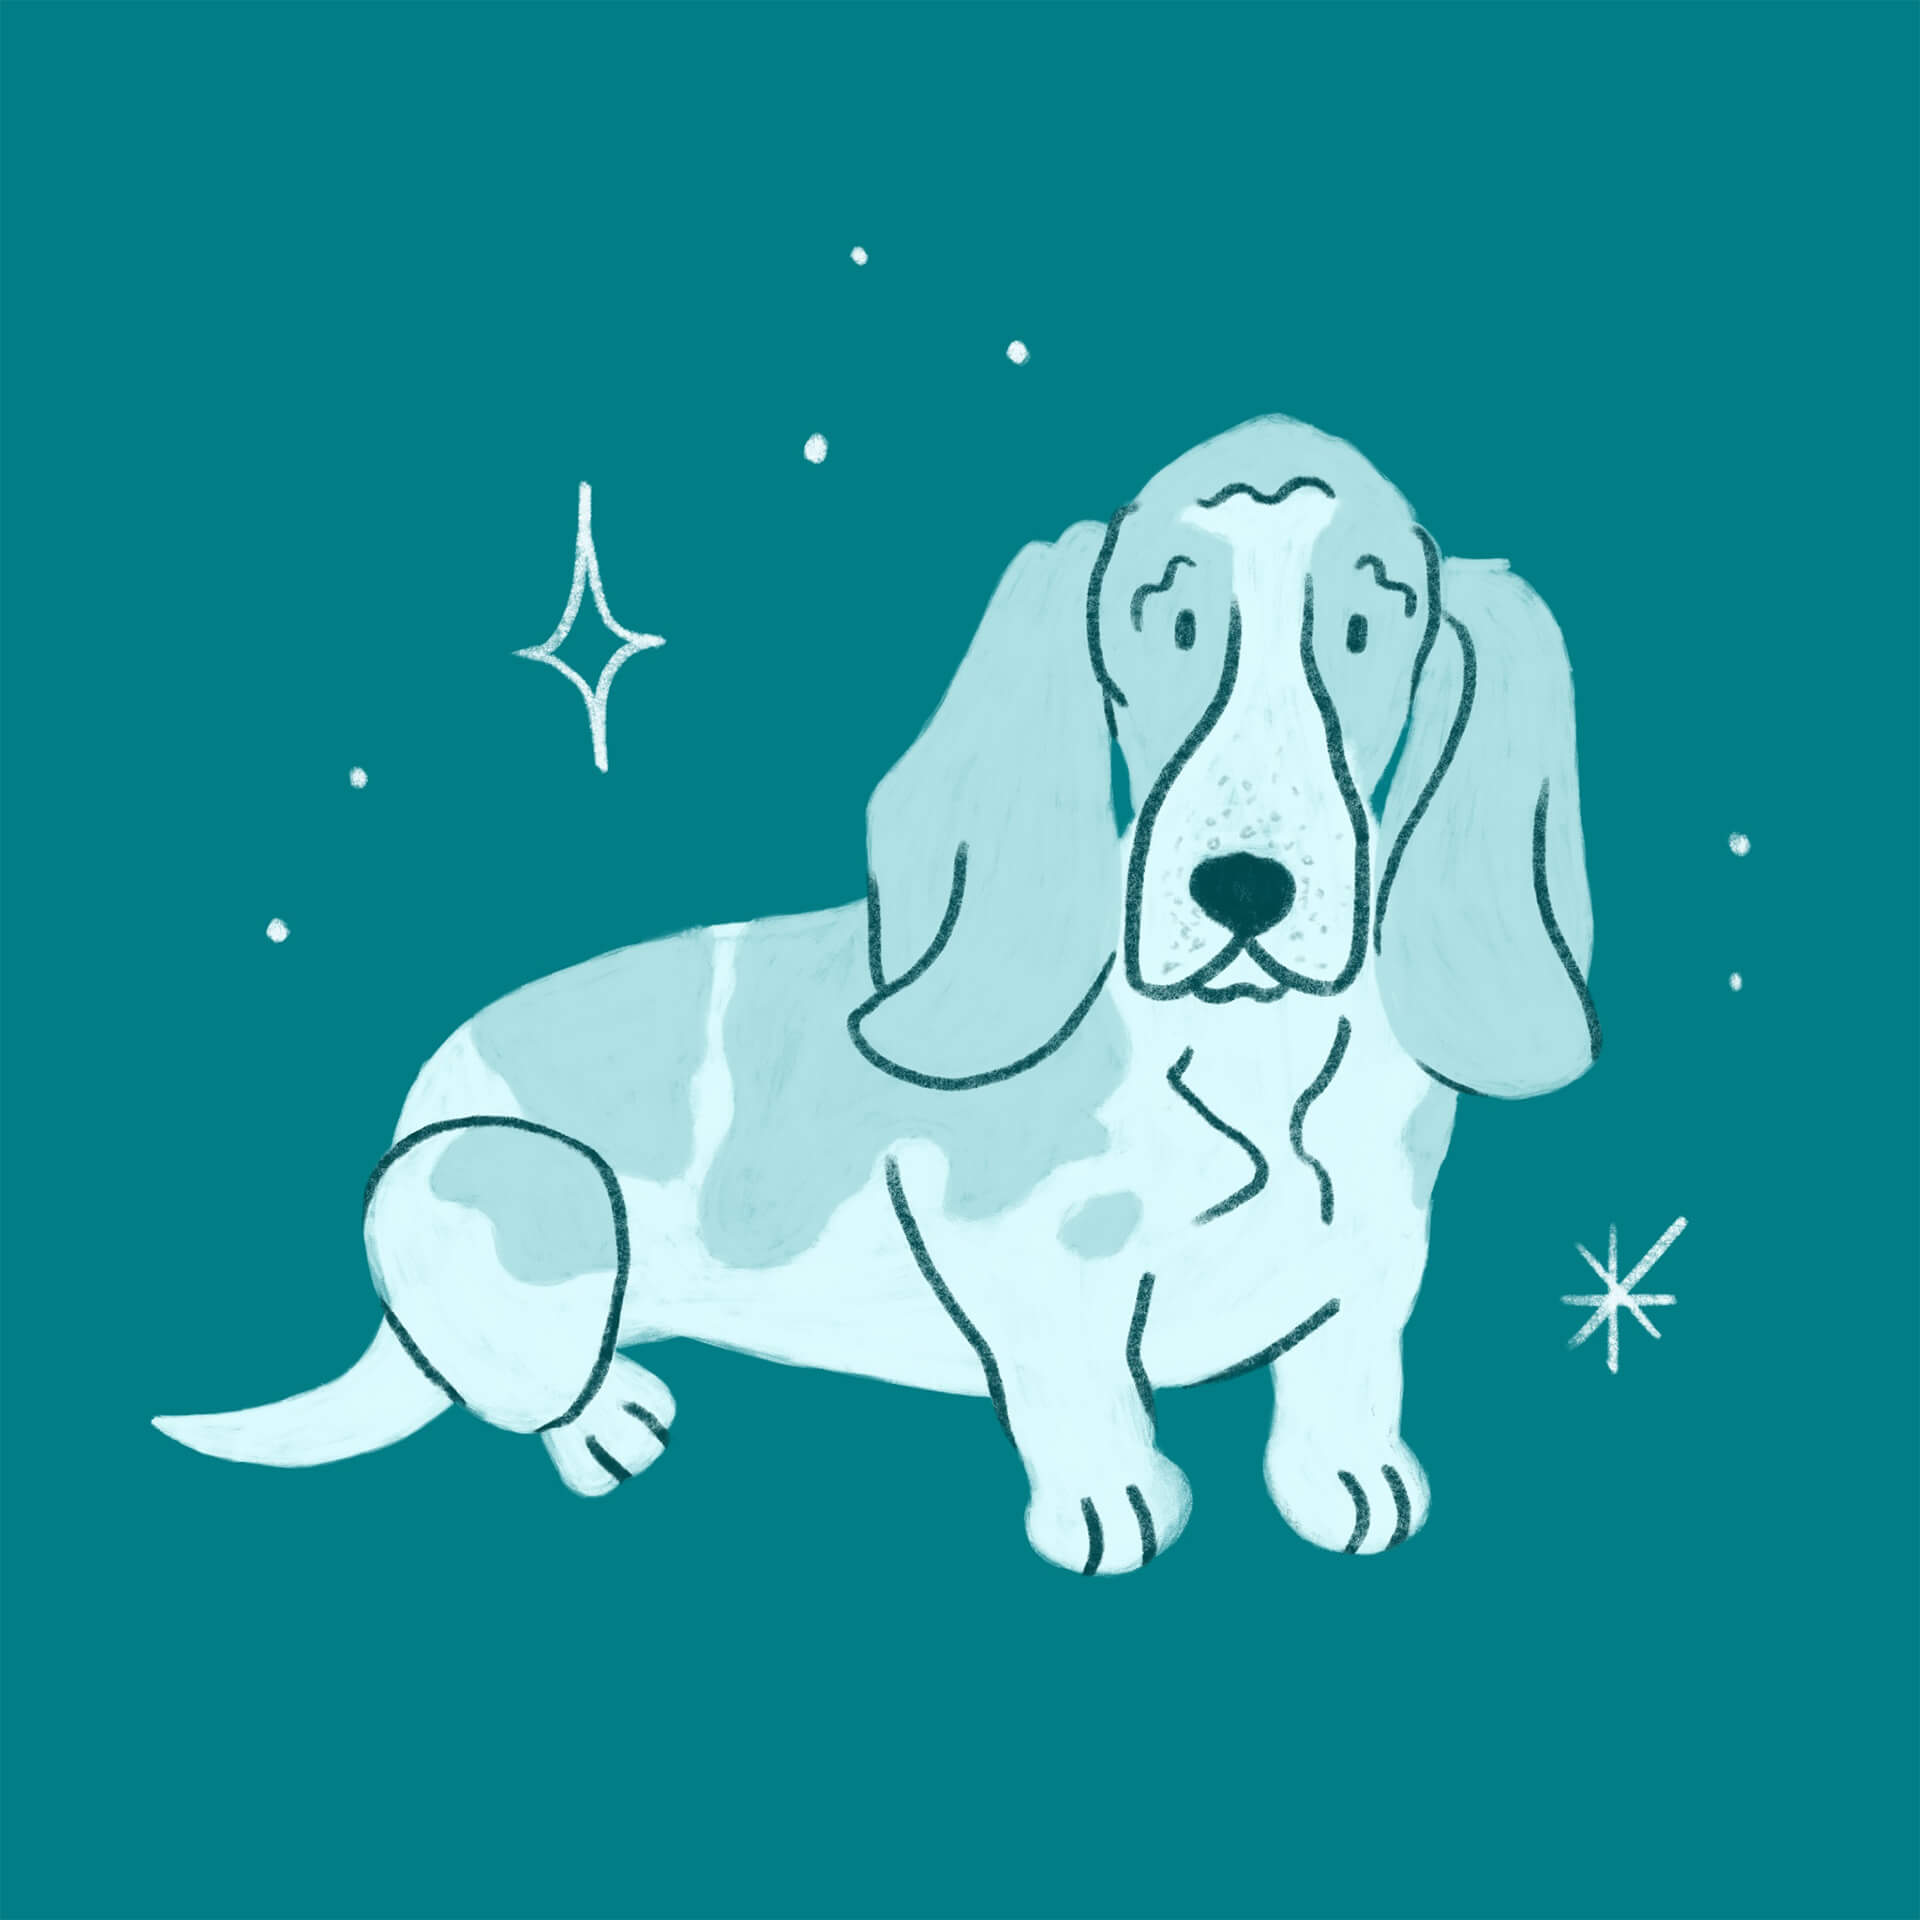 An illustration of a blue basset hound sitting and looking at the viewer